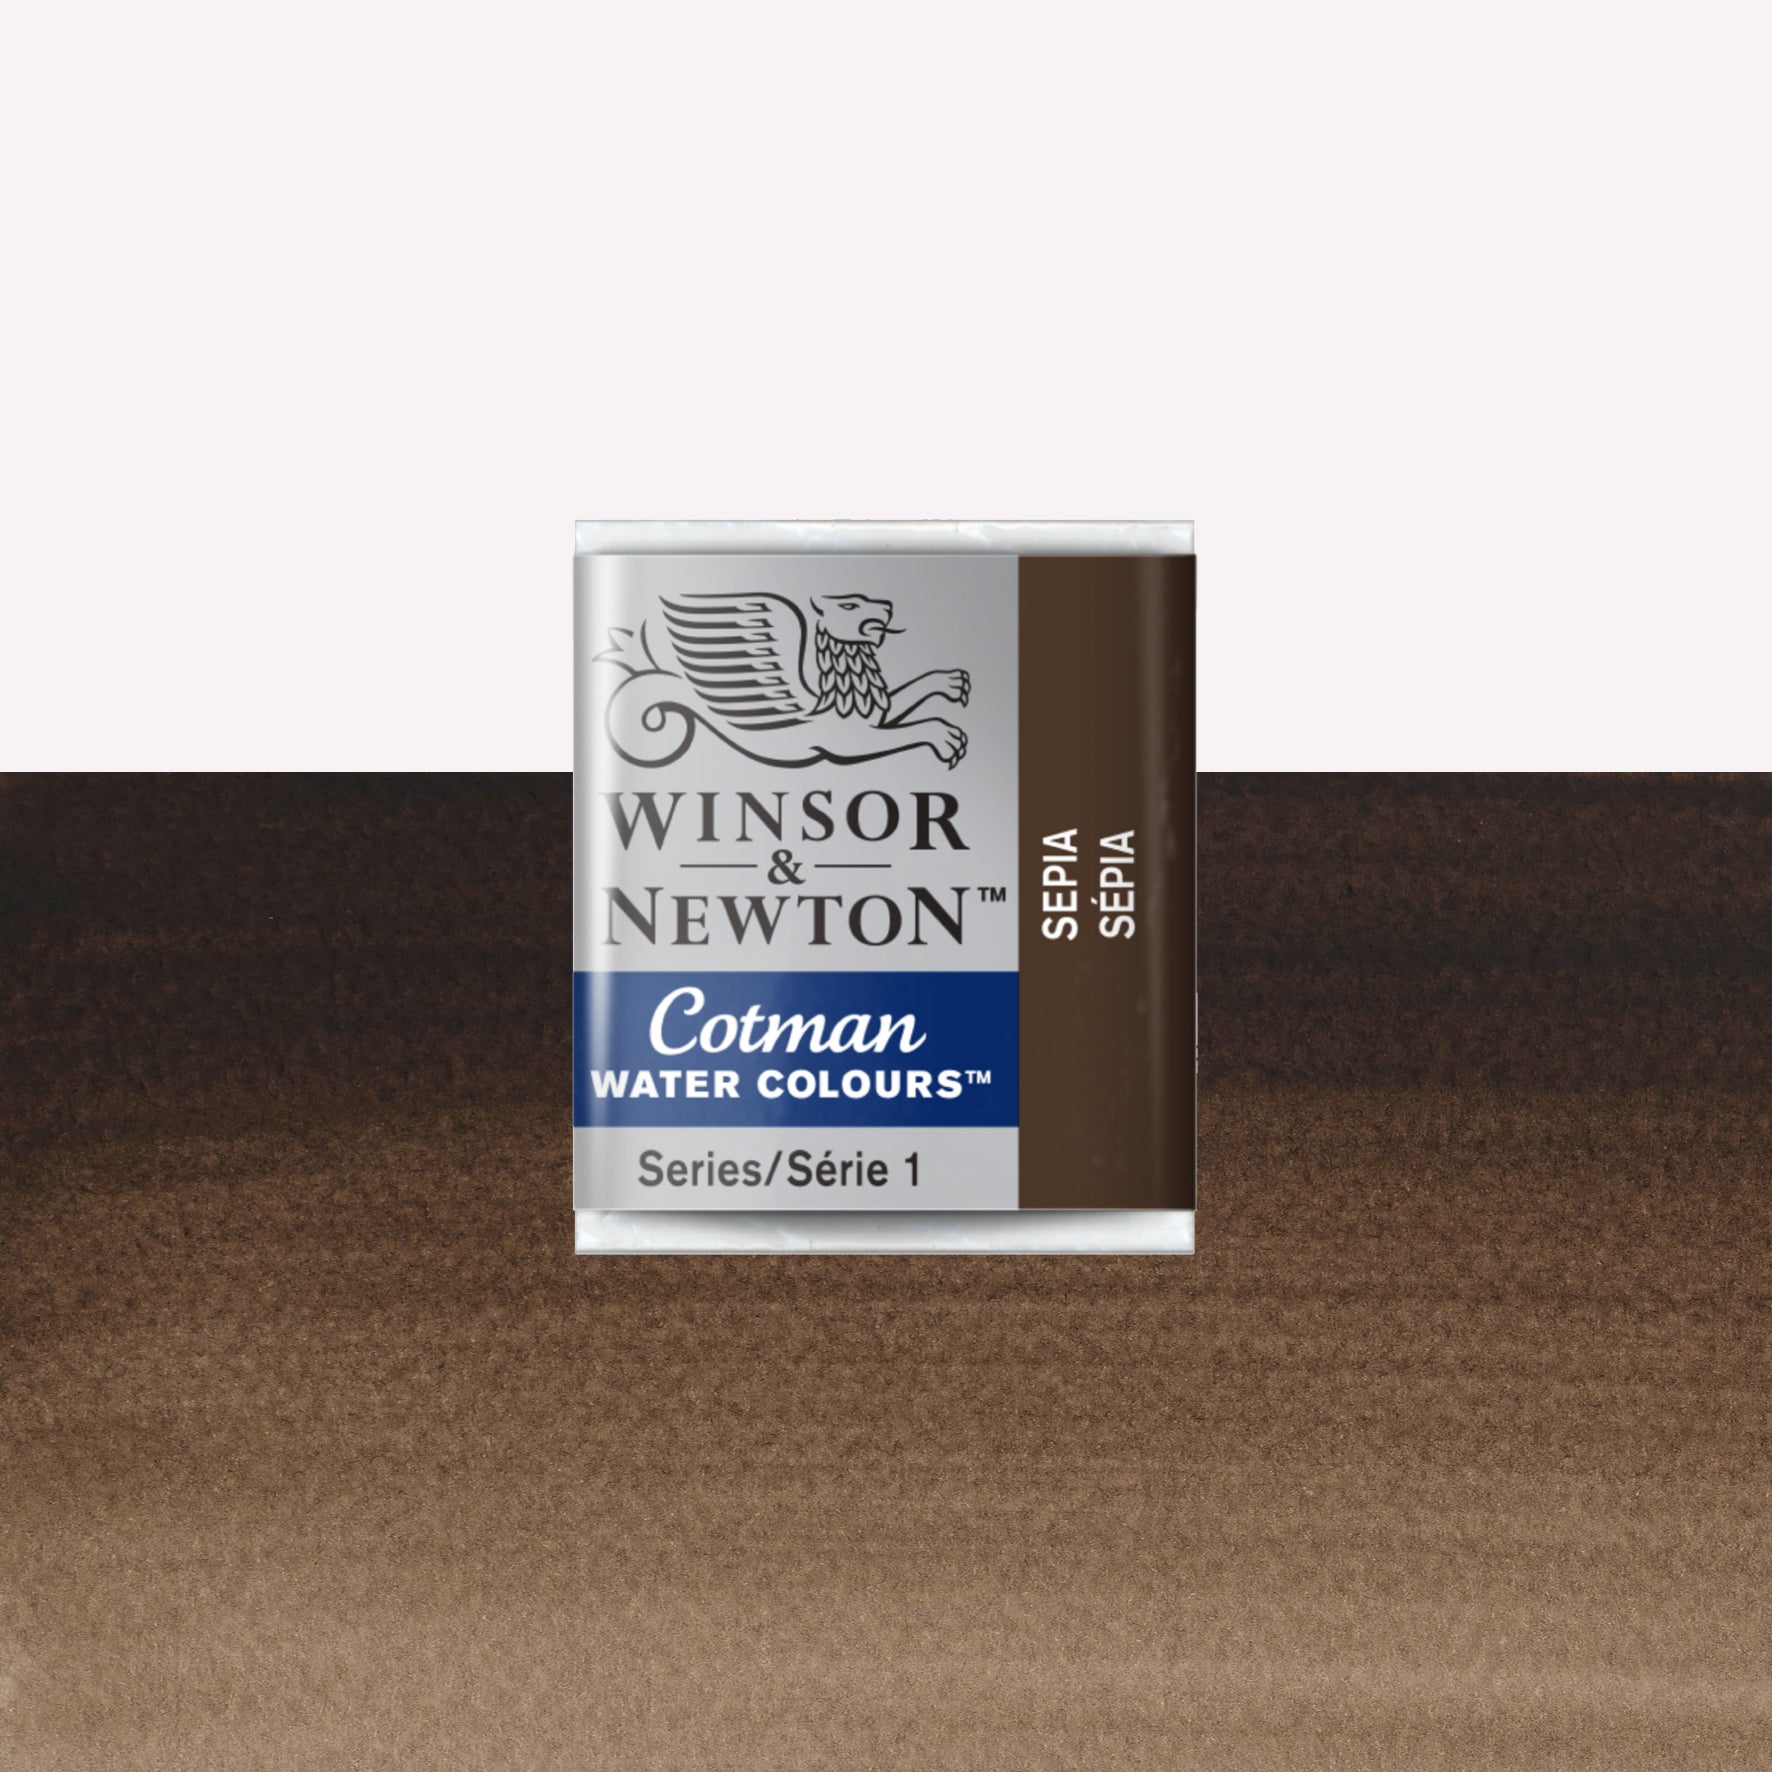 Winsor & Newton Cotman watercolour half pan in the shade Sepia over a vibrant colour swatch. These half pans have a solid formula and are packaged in compressed paint cake. 